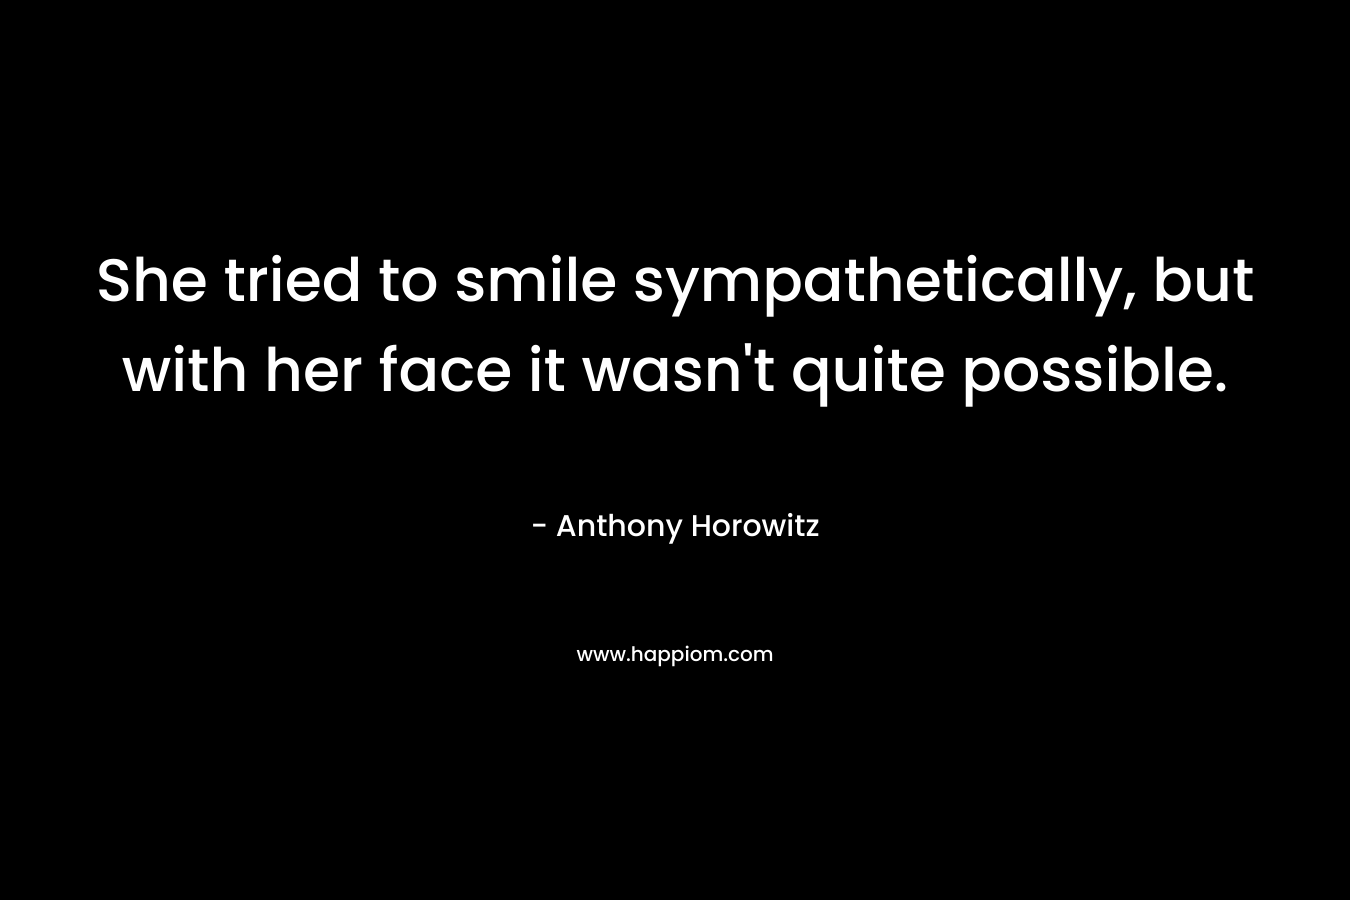 She tried to smile sympathetically, but with her face it wasn’t quite possible. – Anthony Horowitz